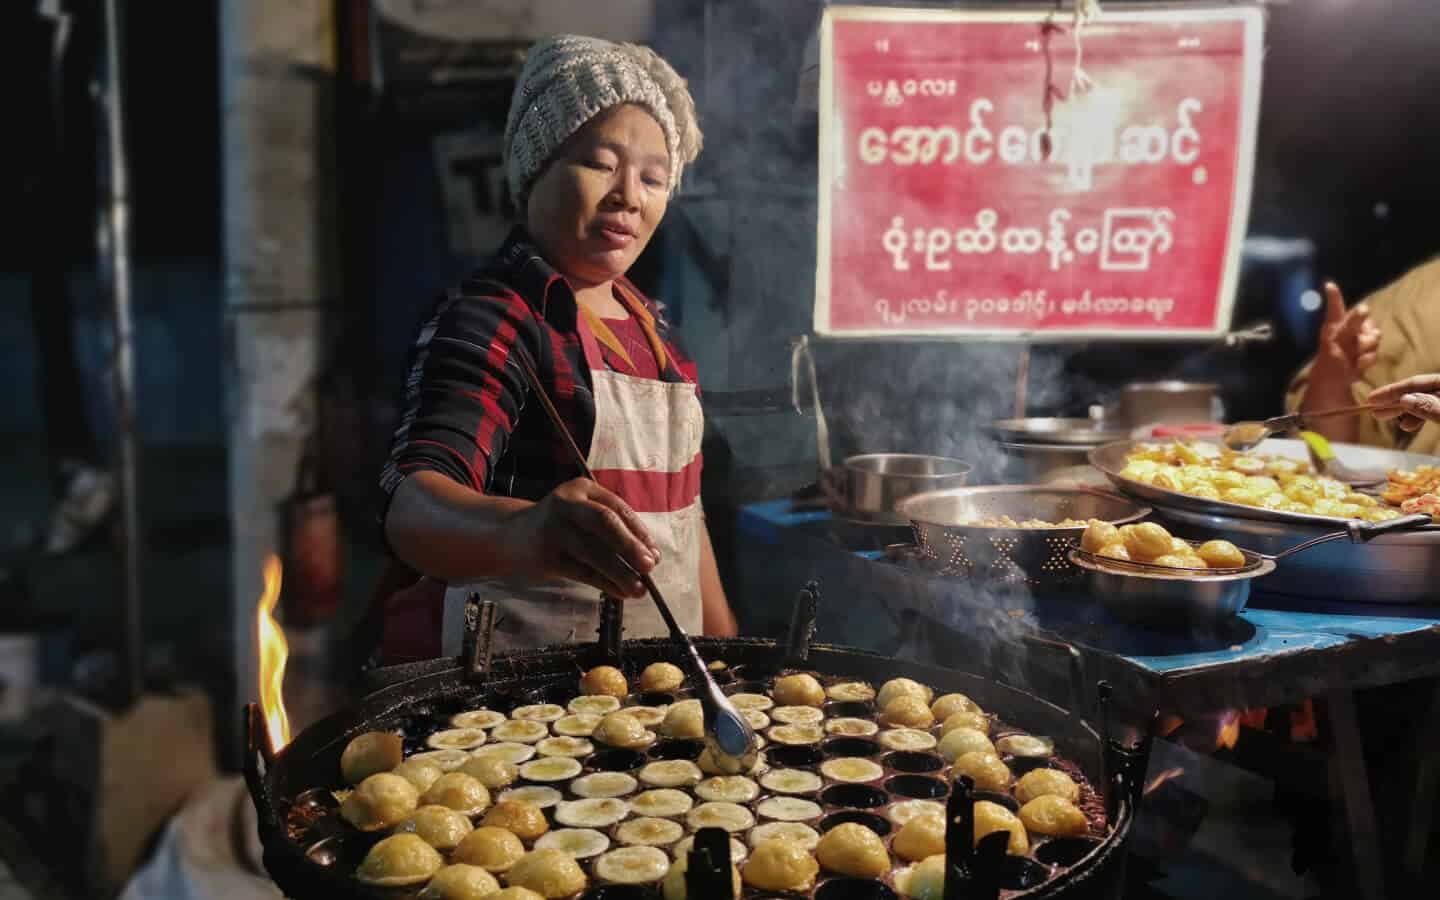 A Guide From Street Food to Michelin Stars